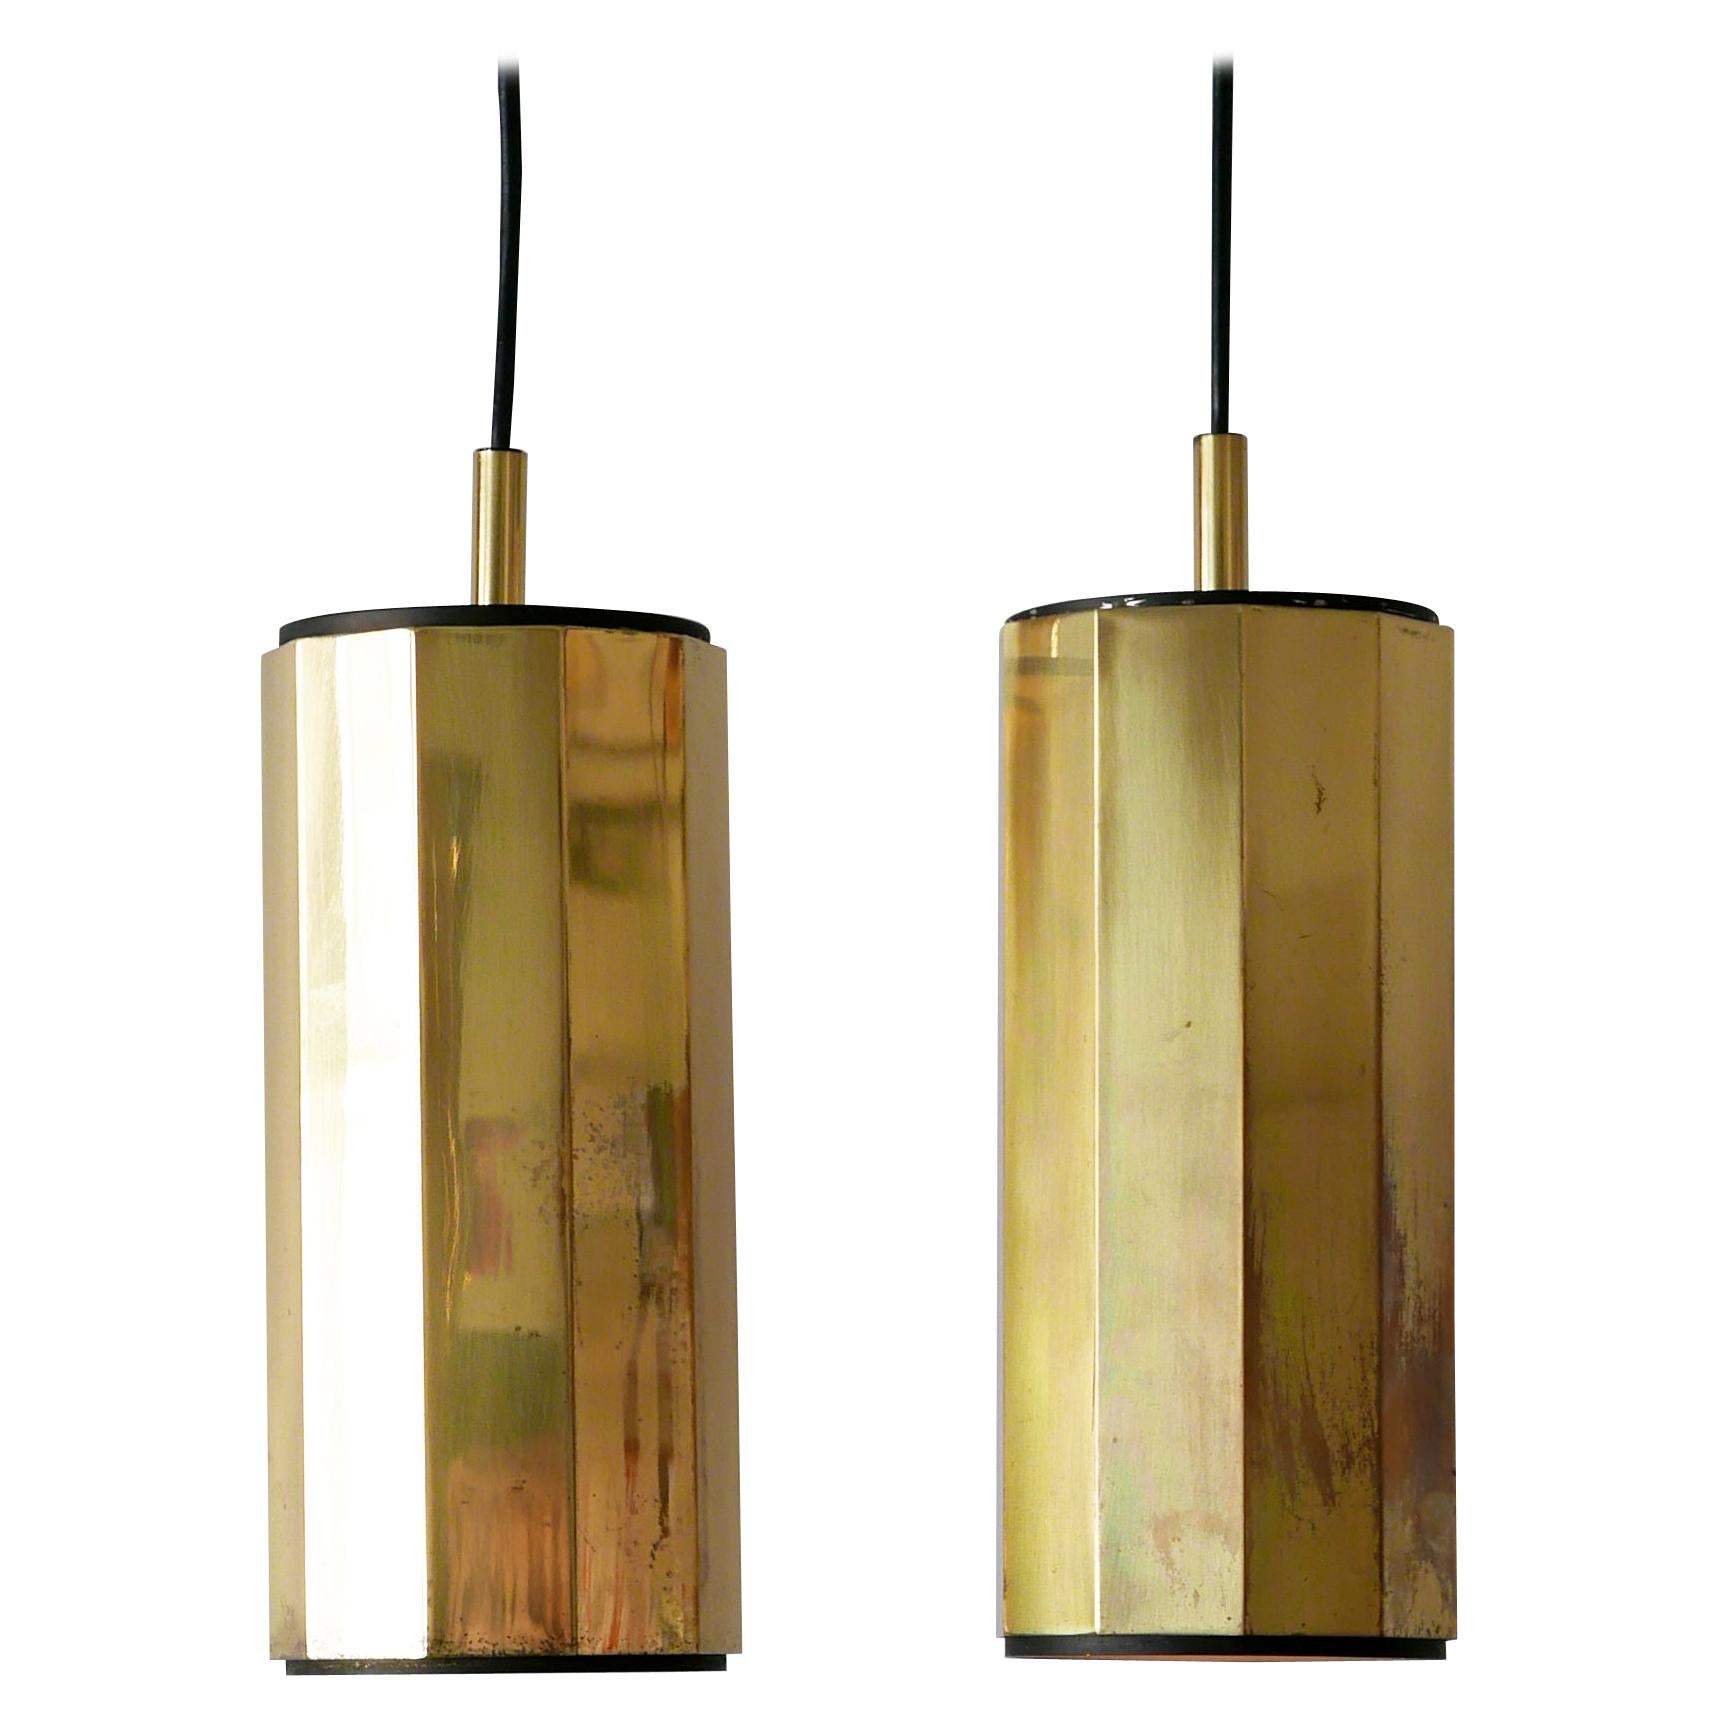 Set of Two Exceptional Mid-Century Modern Decagonal Brass Pendant Lamps, 1960s